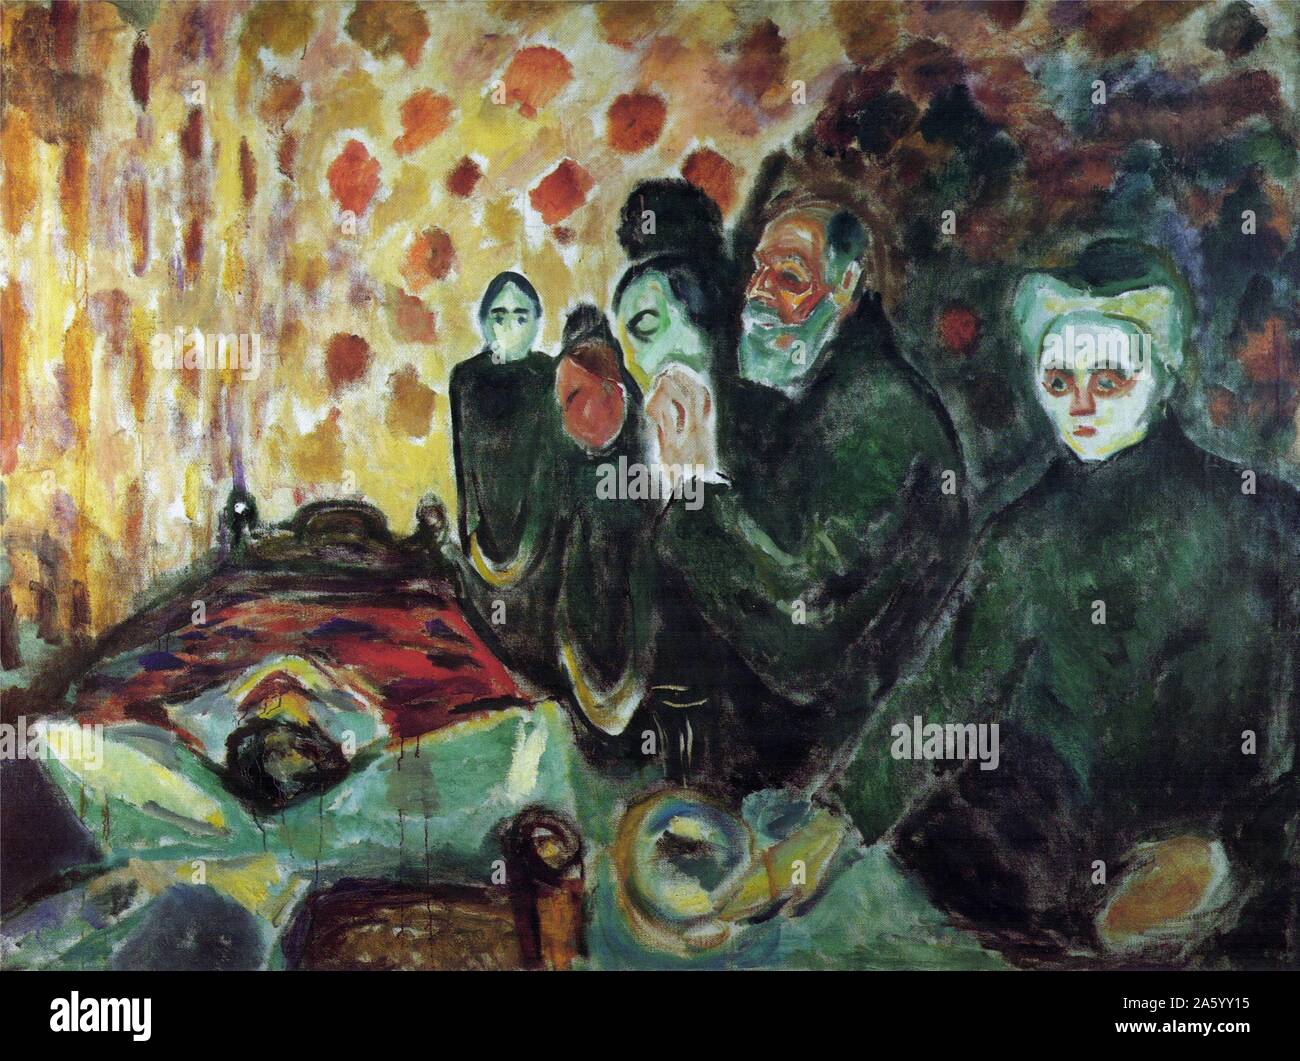 Painting titled 'By the Deathbed' by Edvard Munch (1863-1944) Norwegian painter and printmaker whose intensely evocative treatment of psychological themes built upon some of the main tenets of late 19th-century Symbolism and greatly influenced German Expressionism in the early 20th century. One of his most well-known works is The Scream of 1893. Dated 1895 Stock Photo